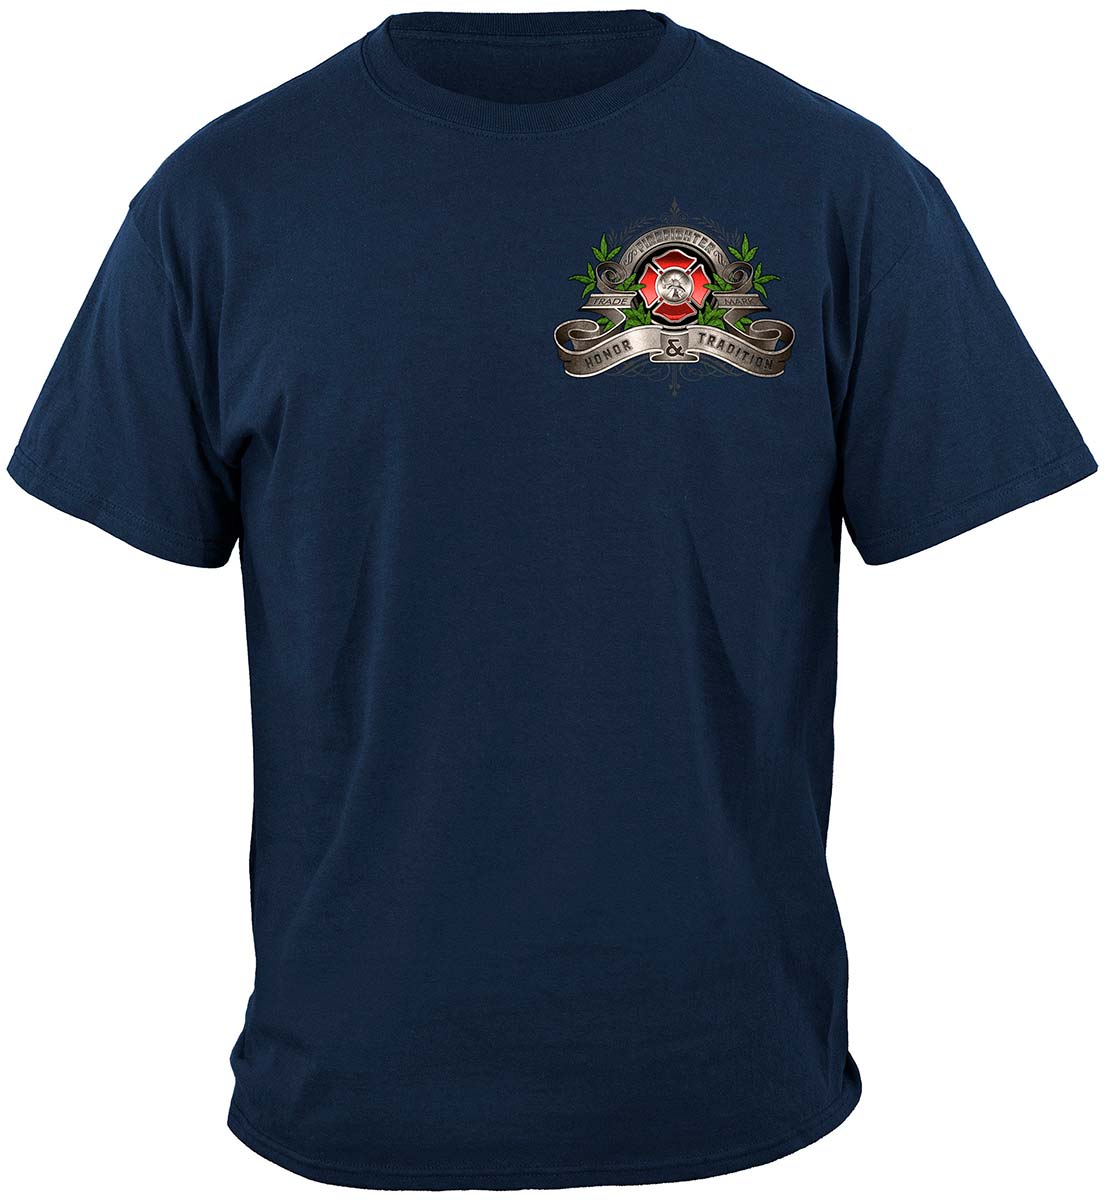 Firefighter Traditional Anique Pump Truck Premium Long Sleeves